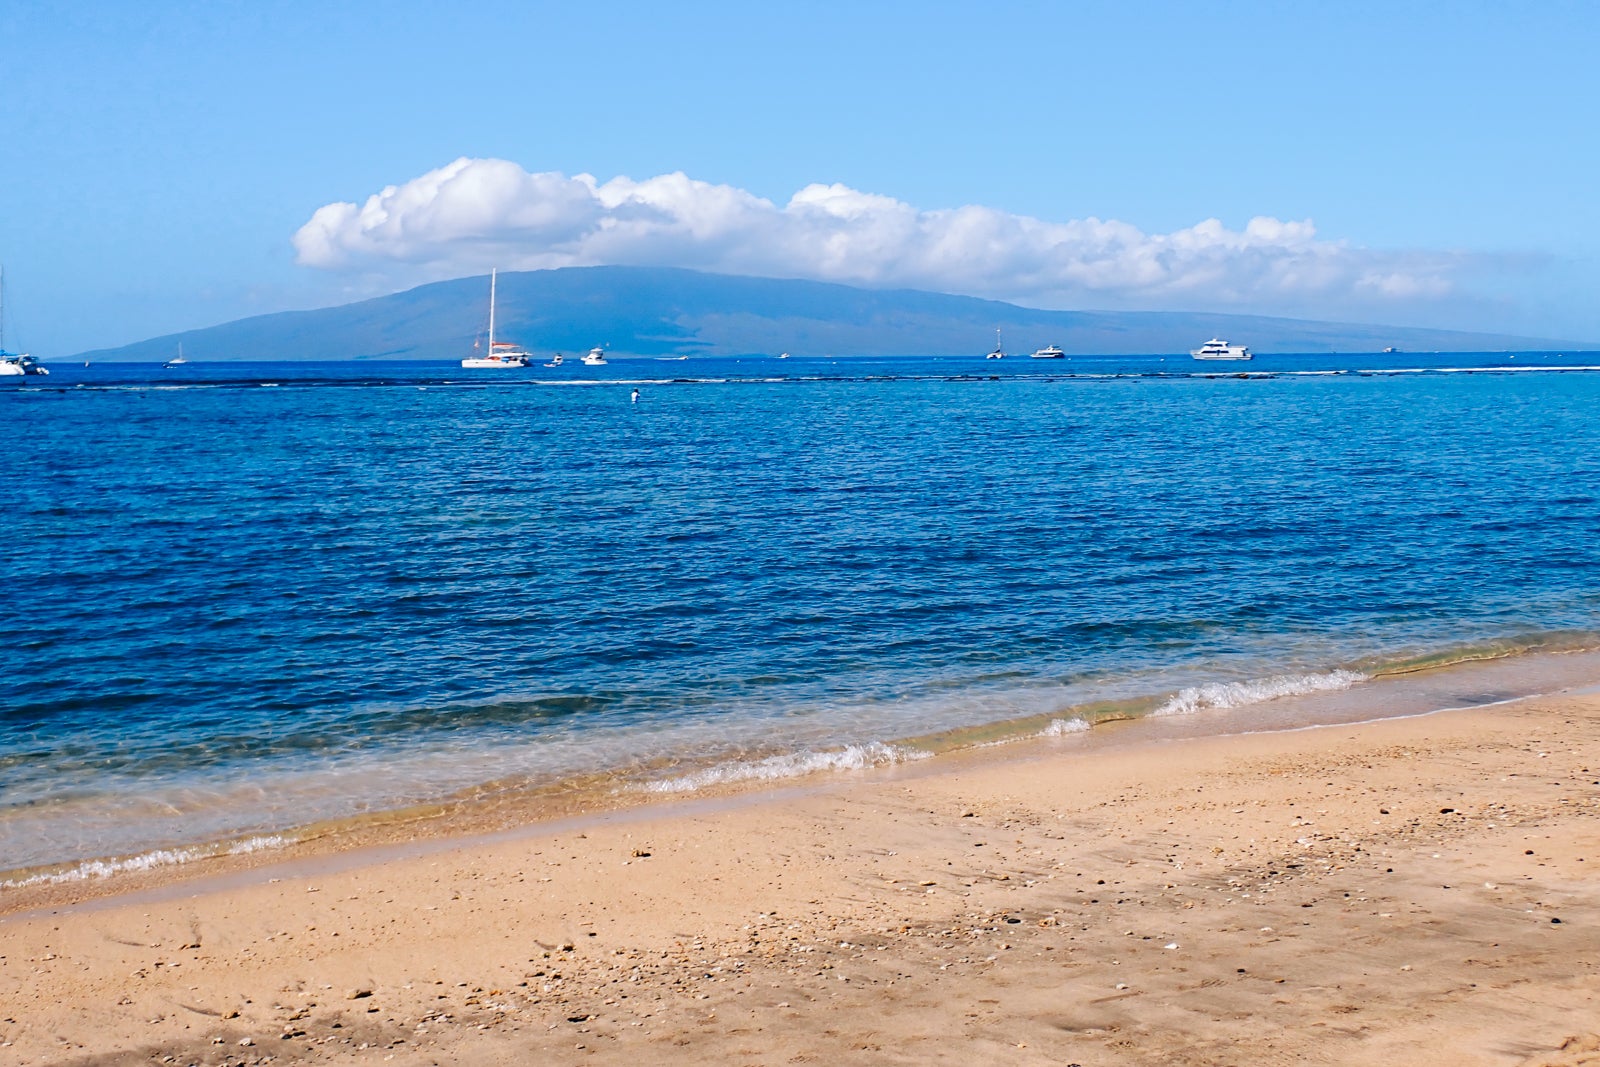 View of boats and distant island from beach